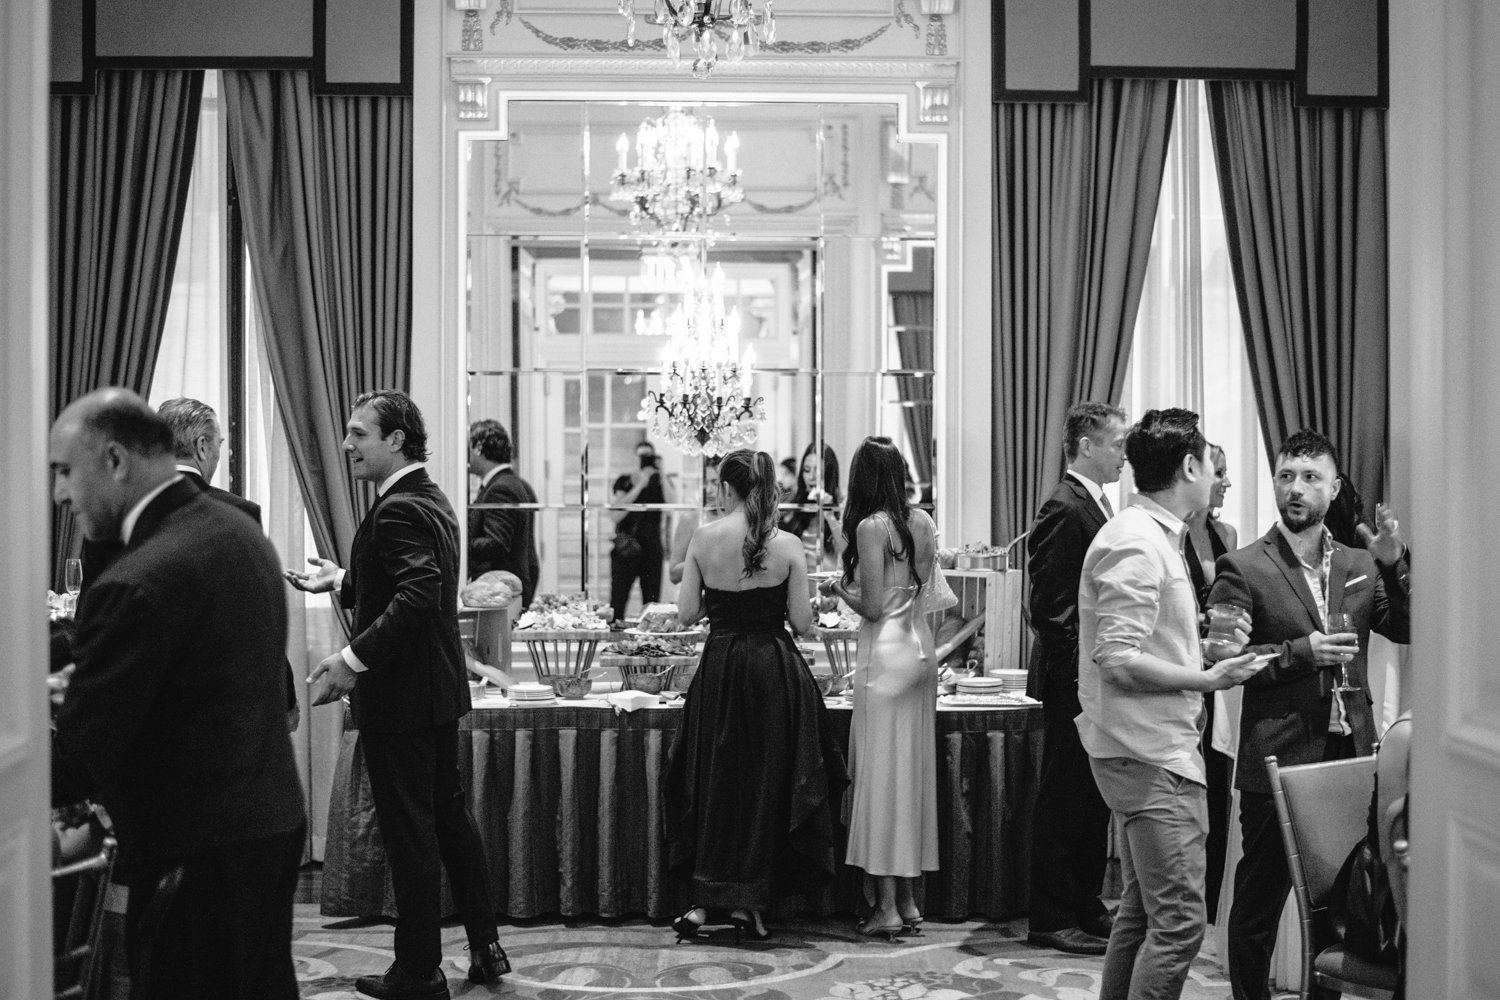 Wedding guests mingle and stand in front of a table with food at the St. Regis.

Manhattan Luxury Wedding. New York Luxury Wedding Photographer. Wedding in Manhattan. NYC Luxury Wedding.